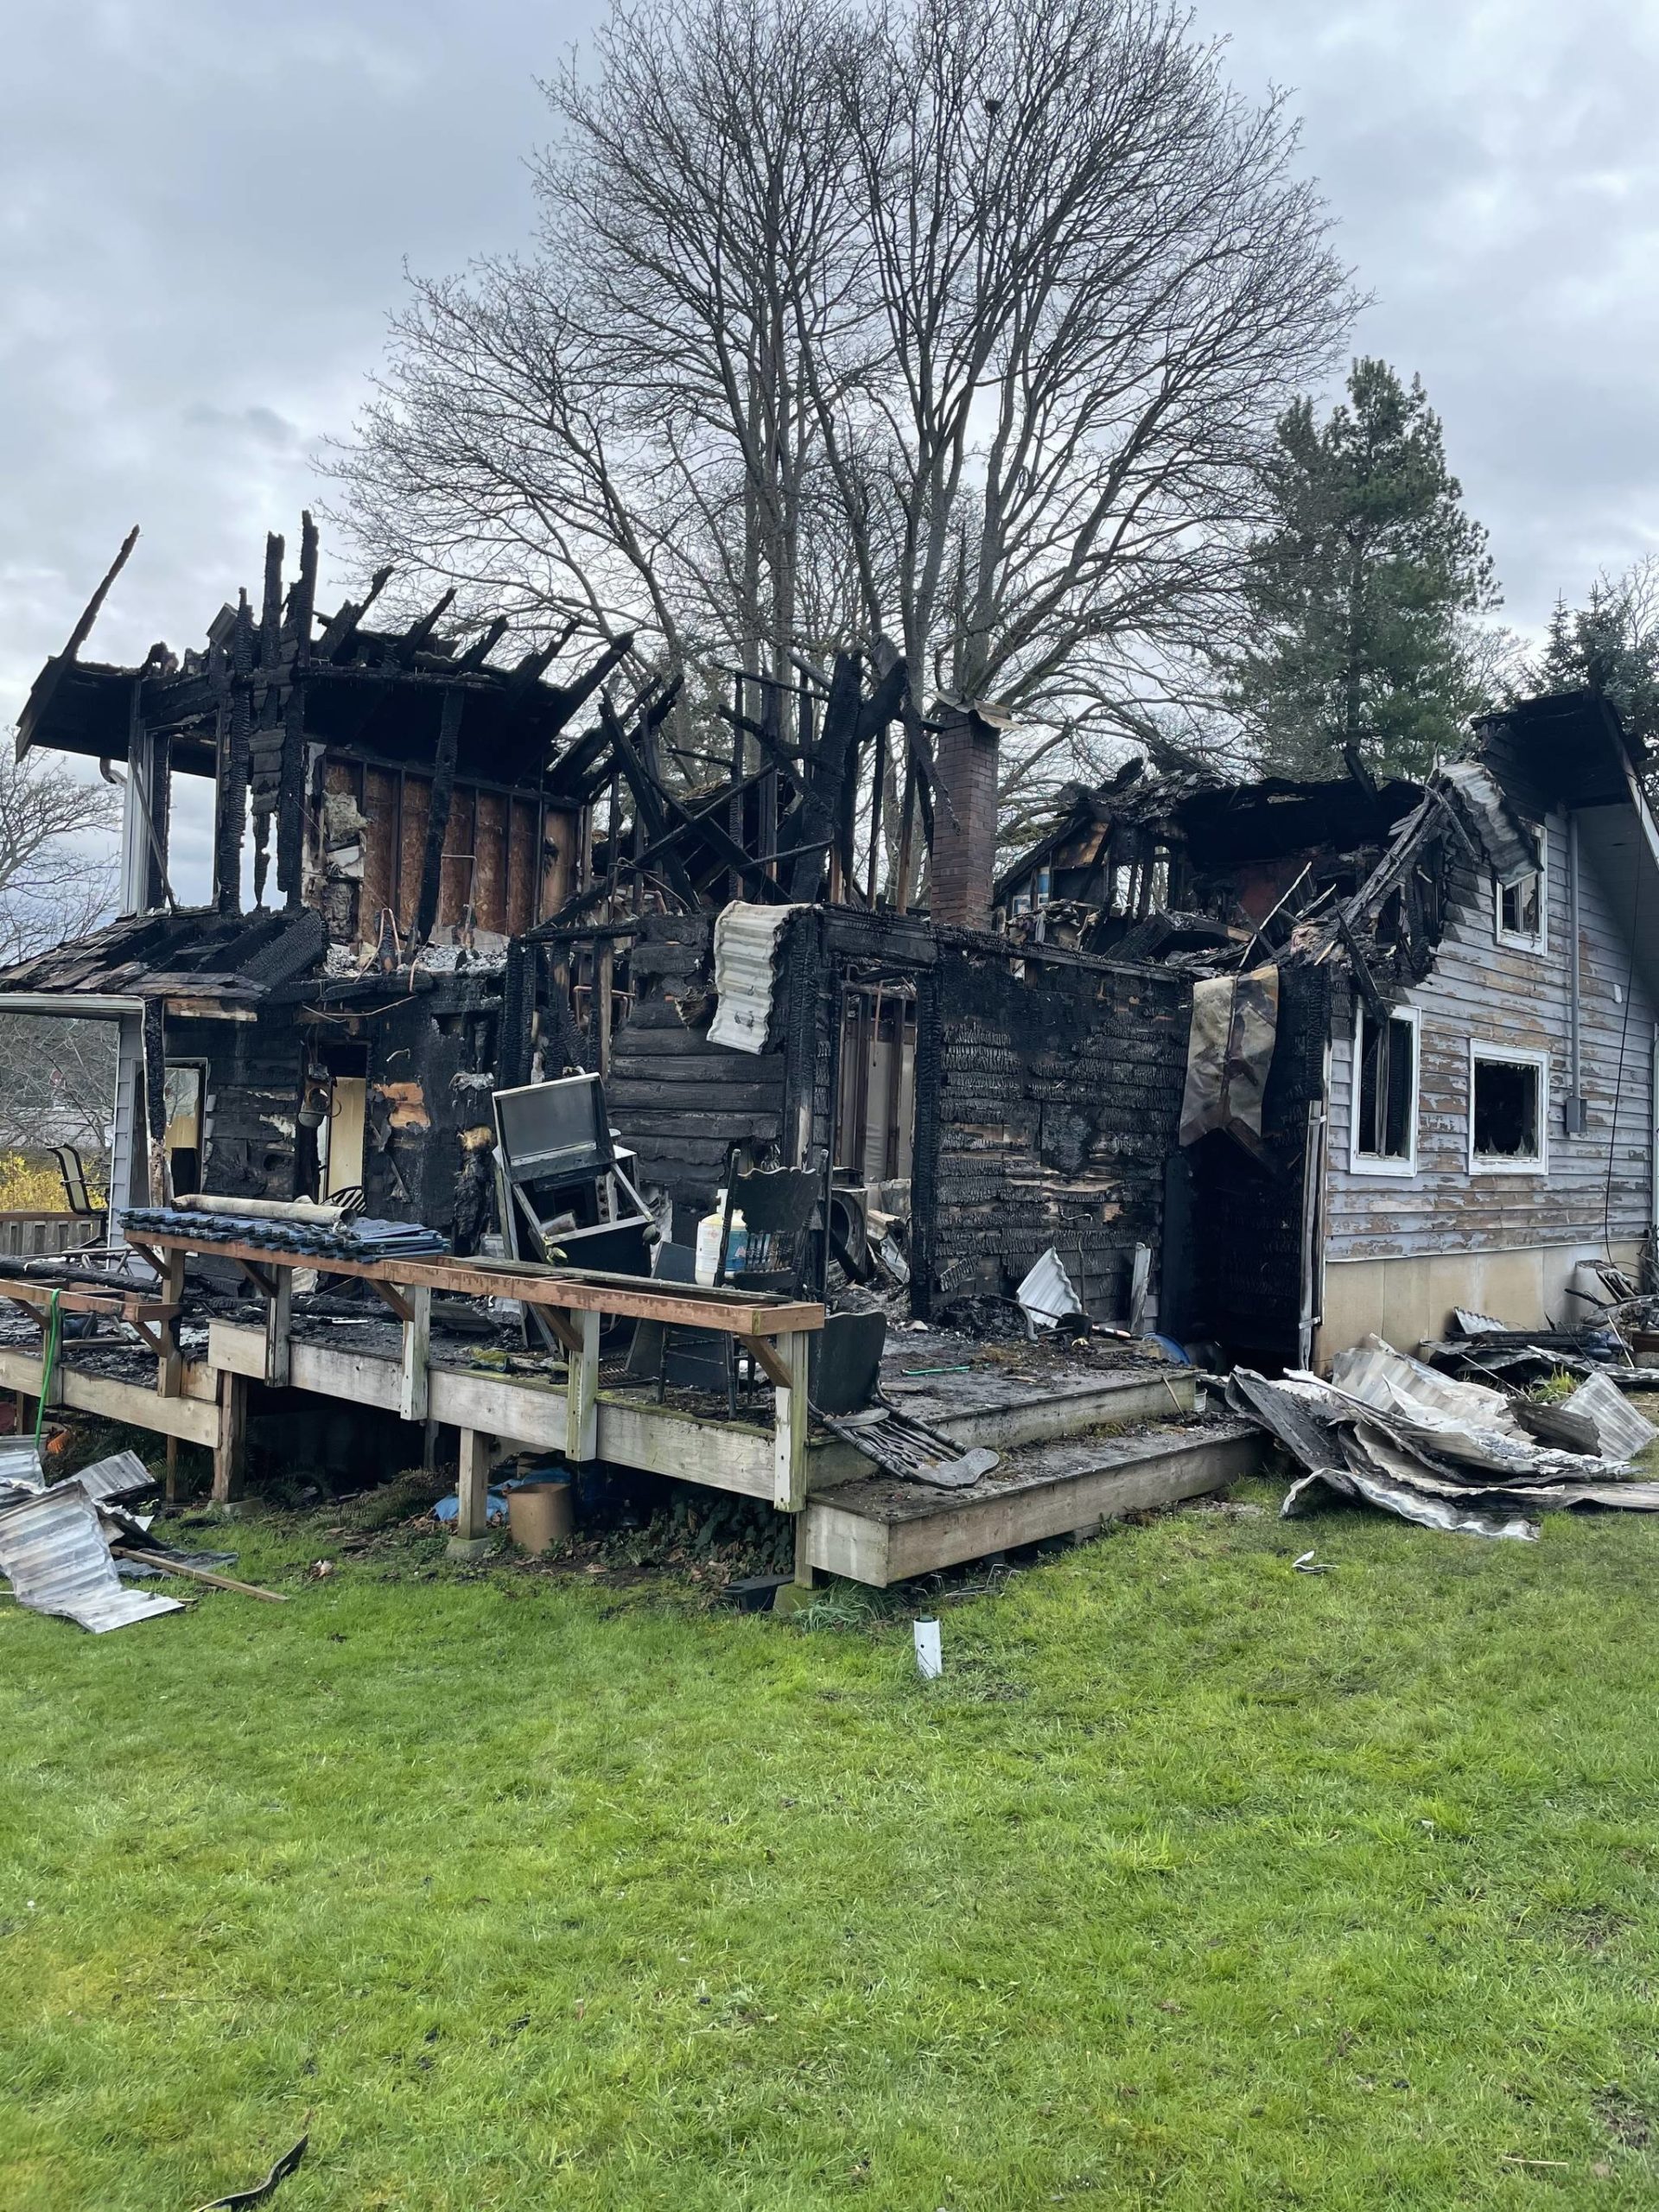 Photo by Seth Eckert
A fire devastated a Diamond Way residence early Wednesday morning. All that remains is the garage.